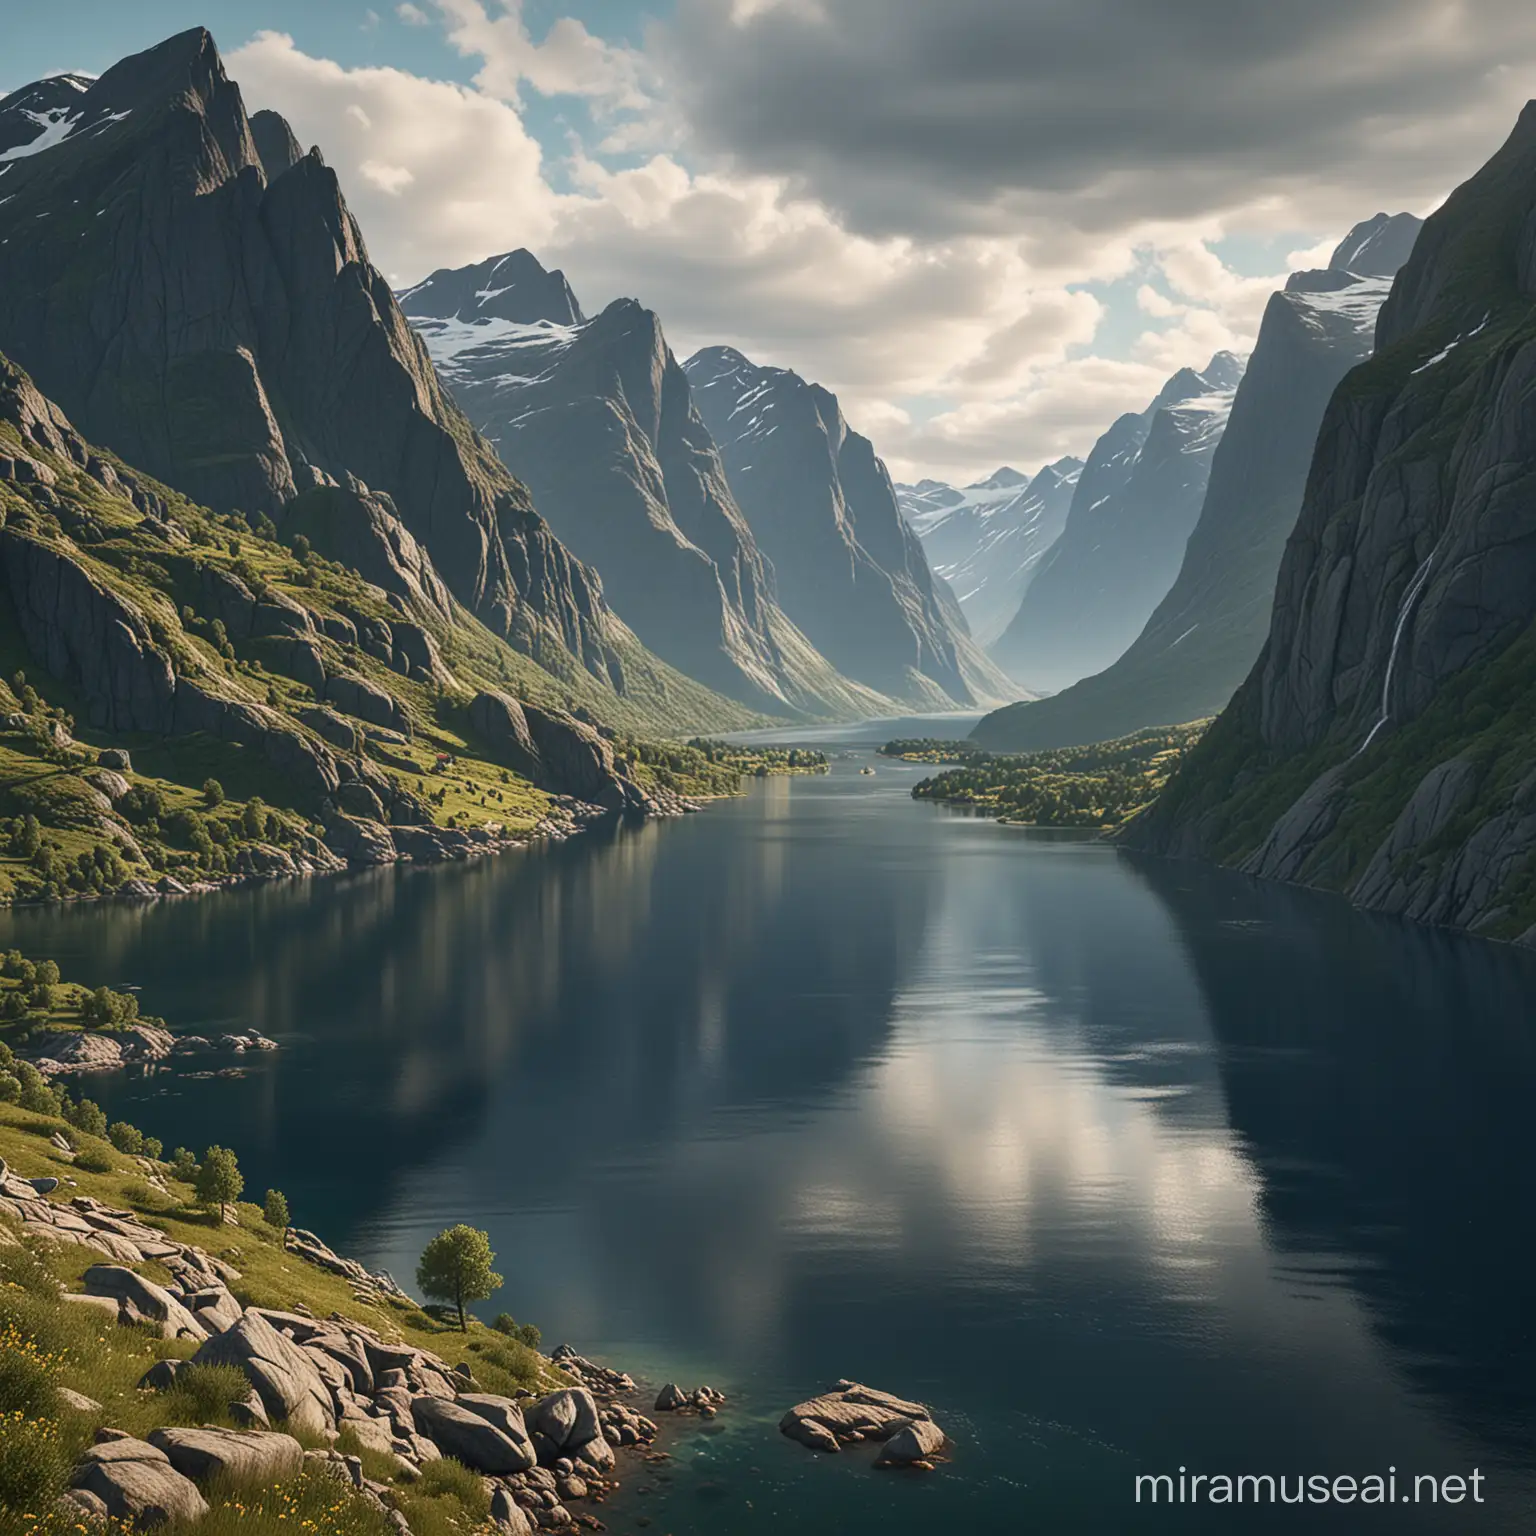 Norwegian Fjord Landscape in Stunning 4K Majestic Mountains and Summer Serenity